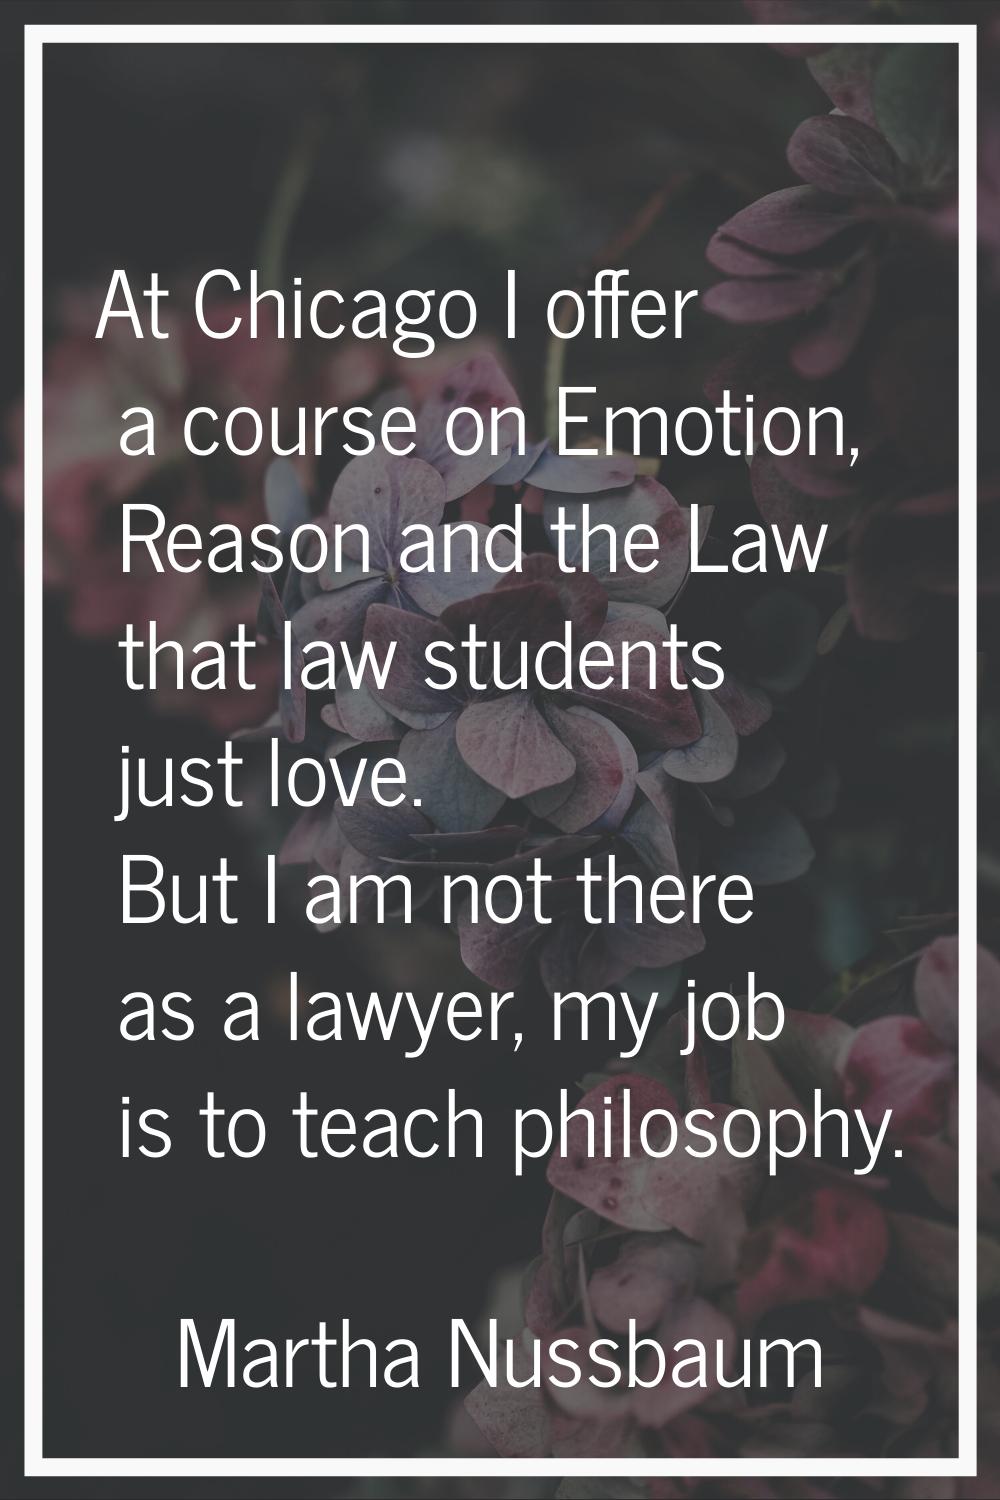 At Chicago I offer a course on Emotion, Reason and the Law that law students just love. But I am no